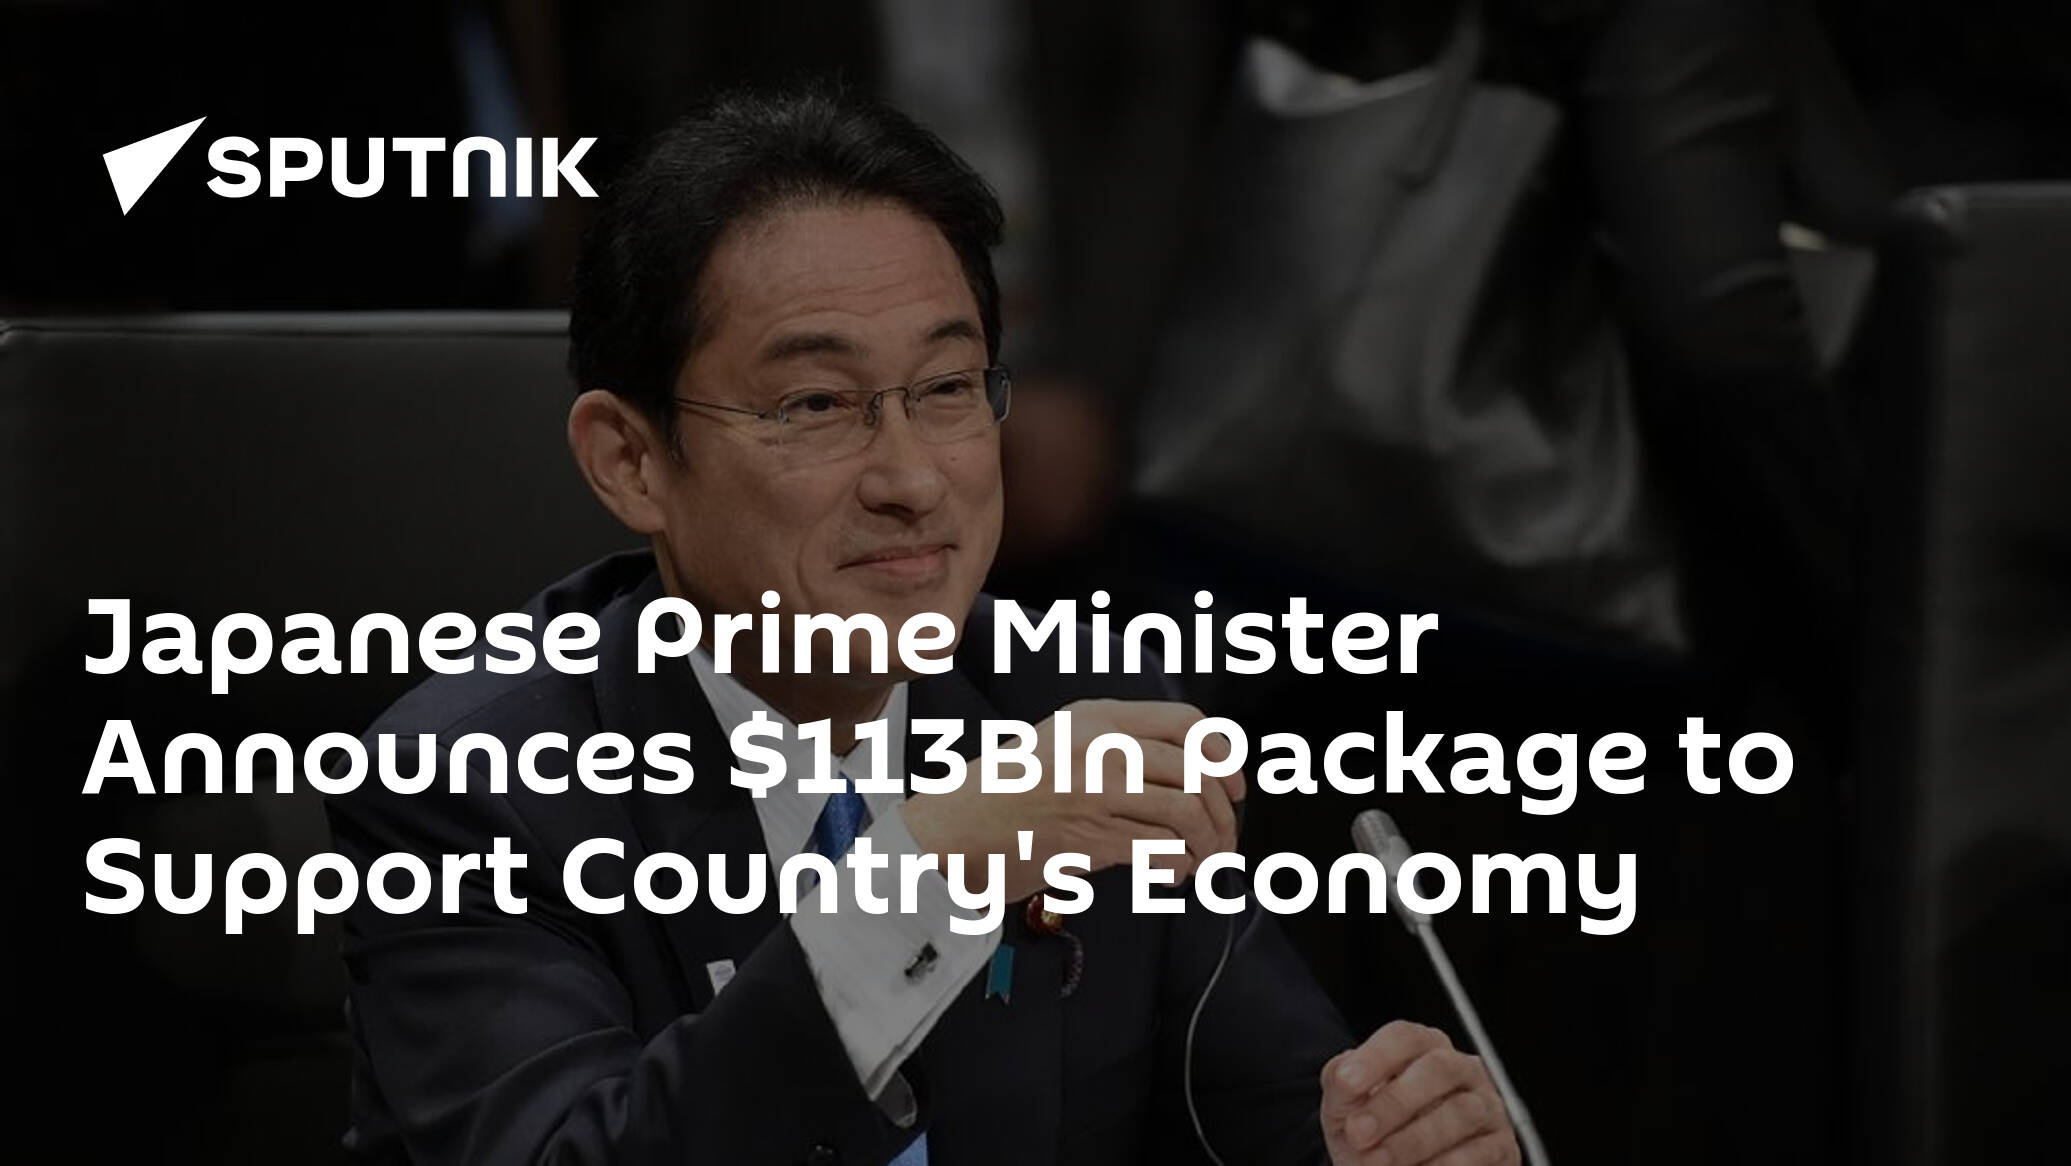 Japanese Prime Minister Announces 3Bln Package to Support Country's Economy